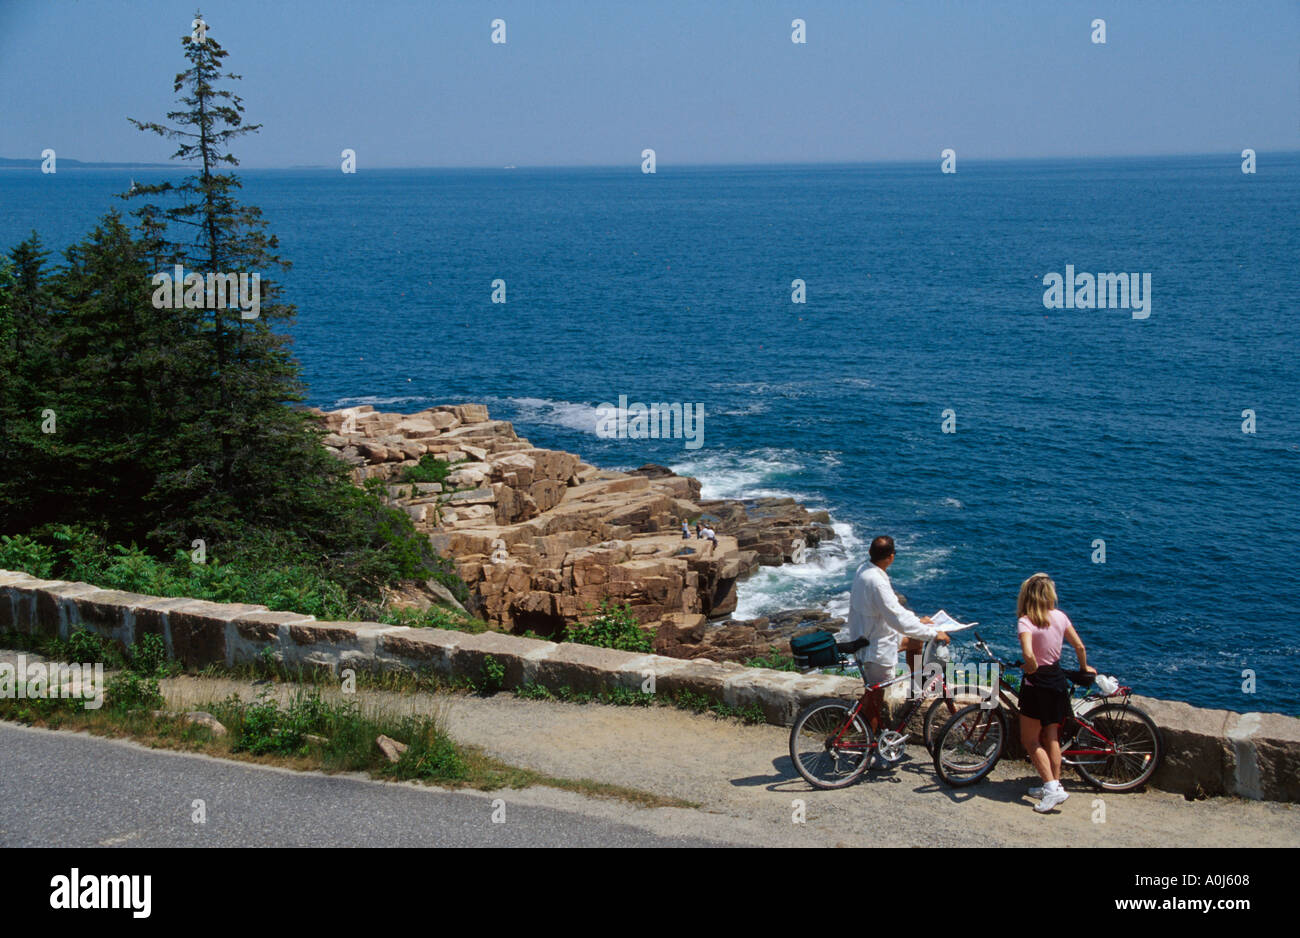 Maine,ME,New England,Down East,Acadia National Park,Federal land,nature,natural,scenery,countryside,historic preservation,public,recreation,Mt. Desert Stock Photo